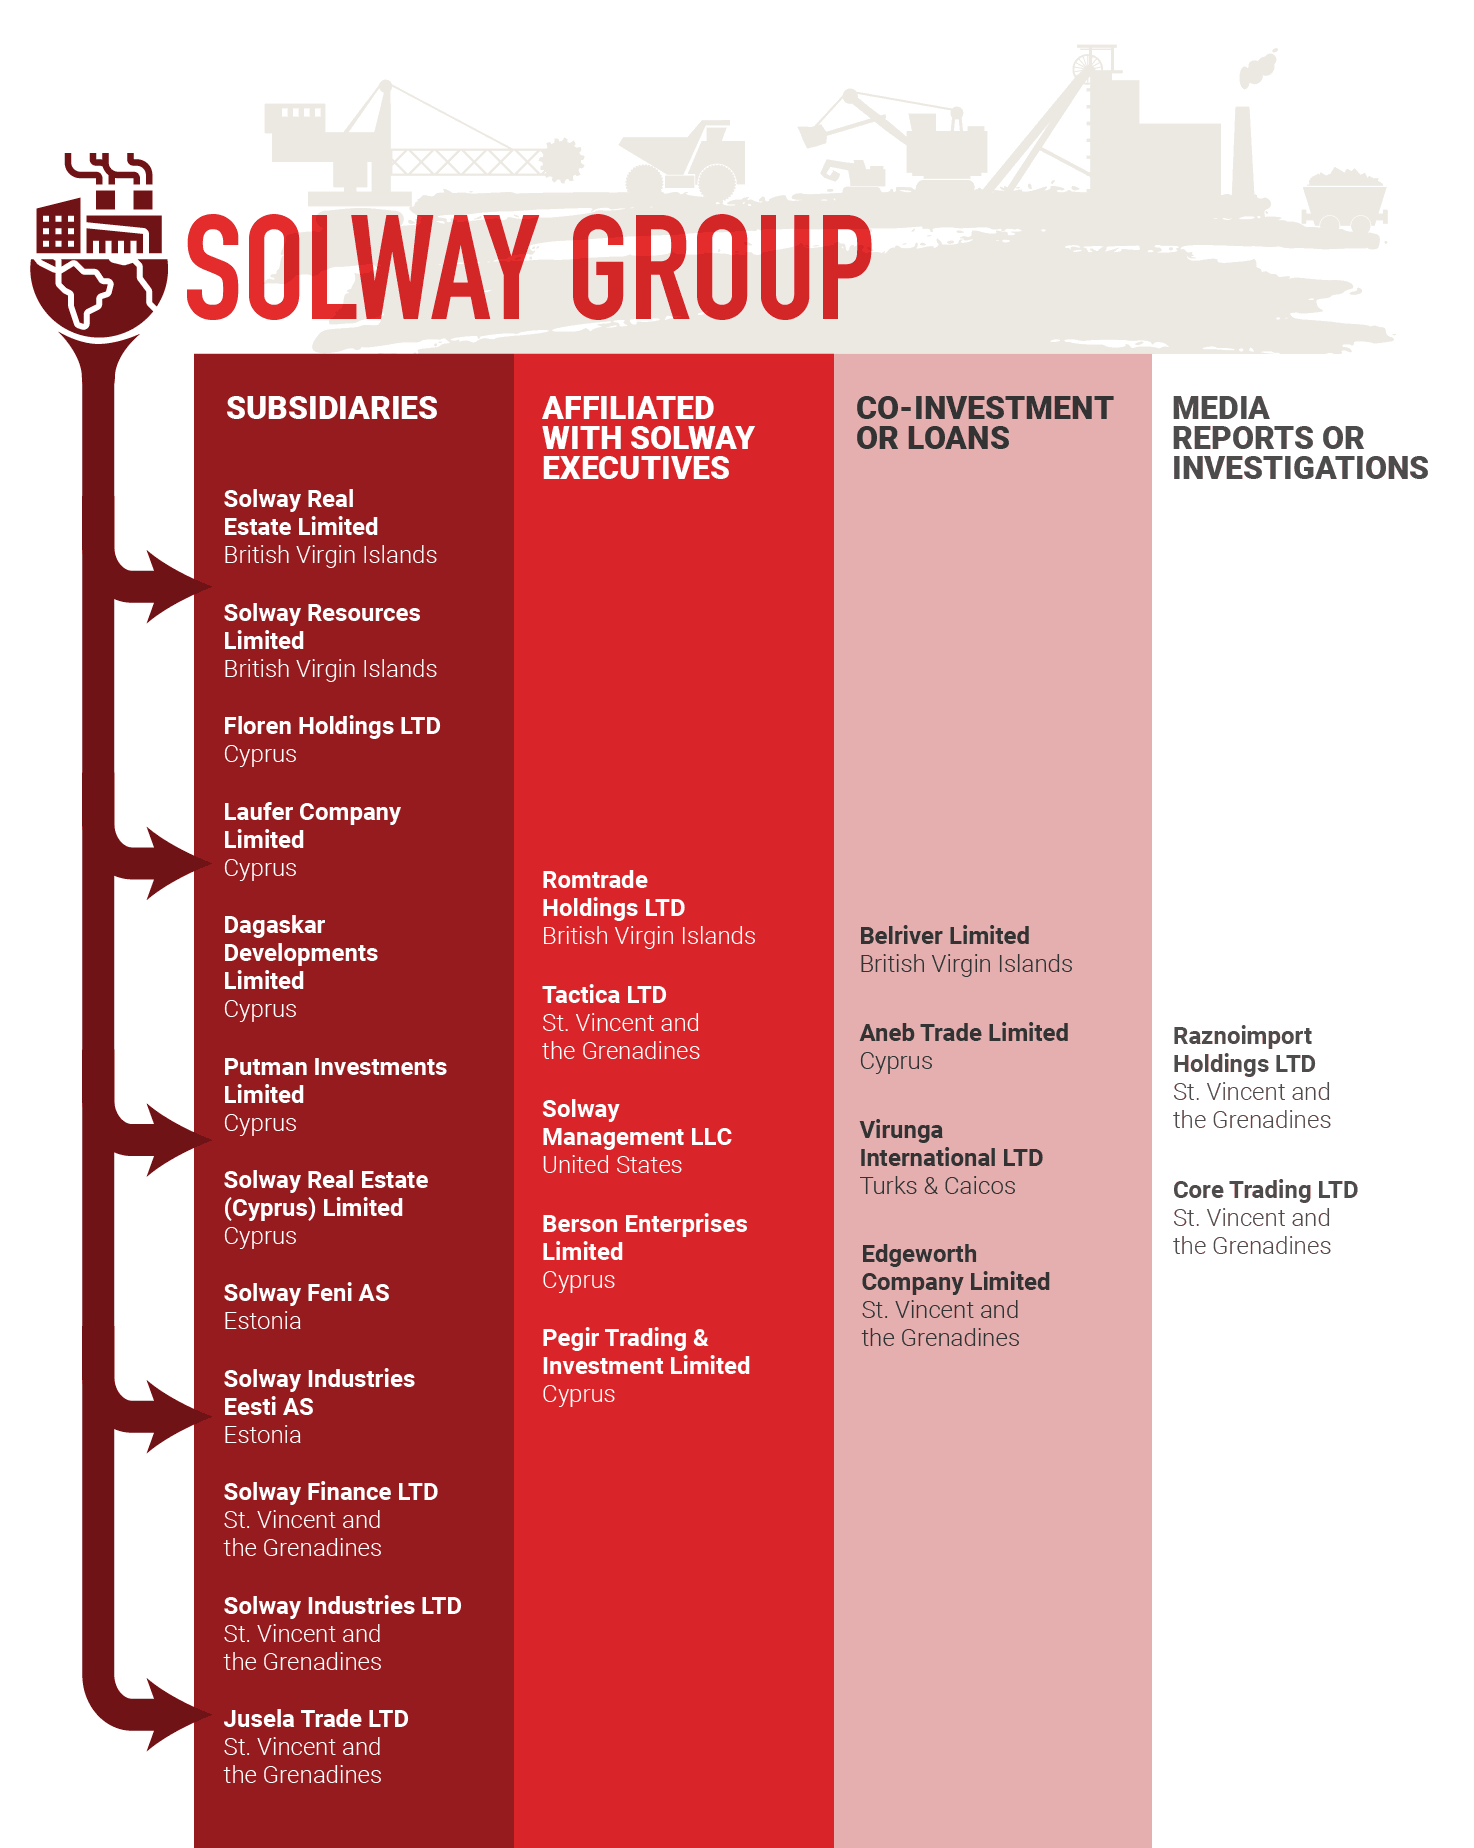 investigations/Solyway-Group-Infographic.png